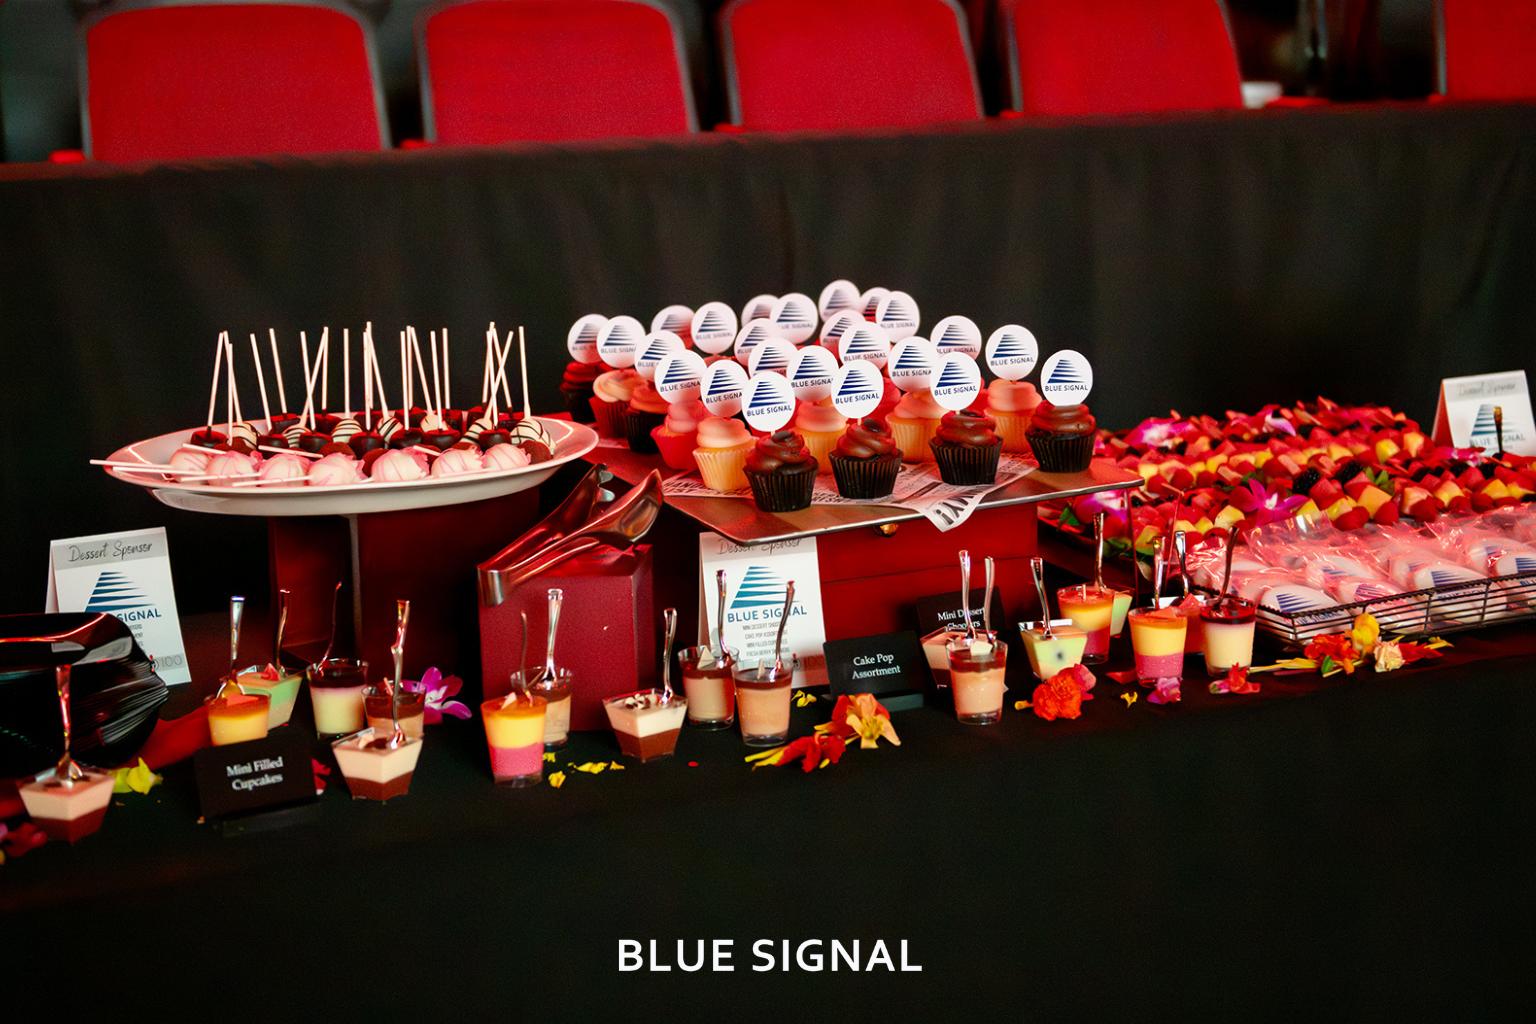 Dessert table sponsored by Blue Signal at the Titan 100 event in Phoenix at the Desert Diamond Arena